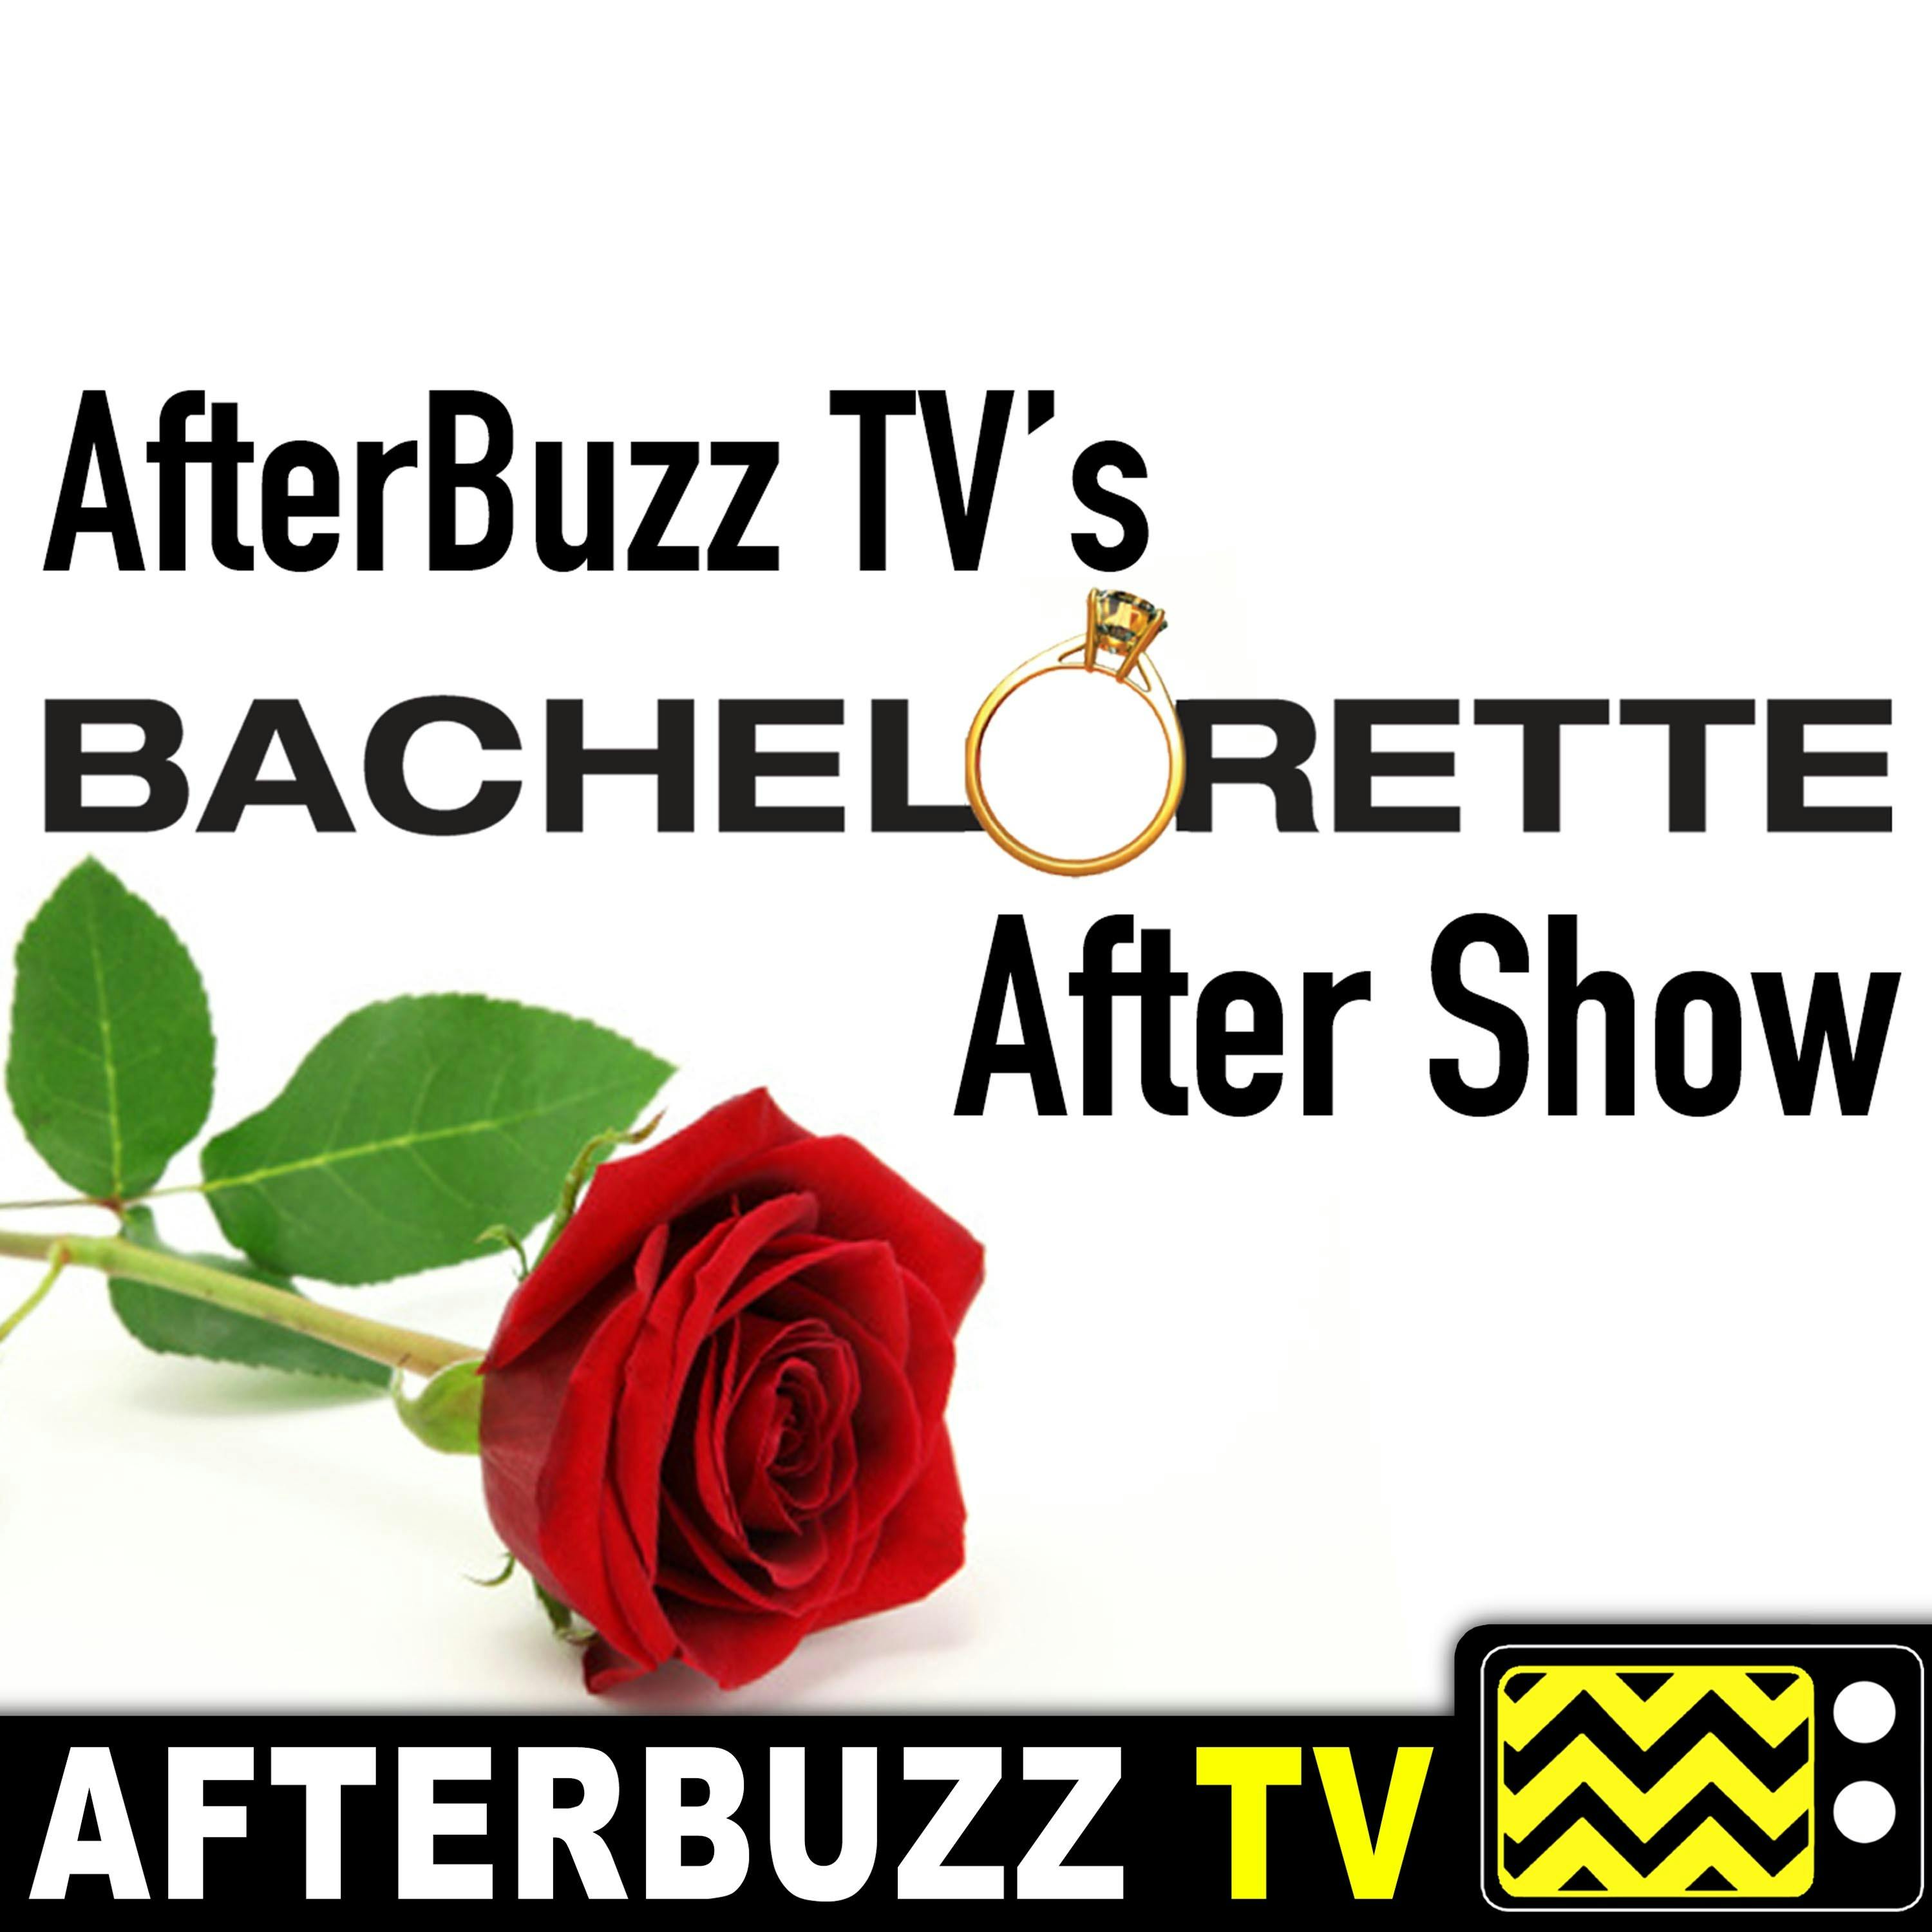 The Bachelorette S:14 | Allison Raskin guests on Episode 3 | AfterBuzz TV AfterShow